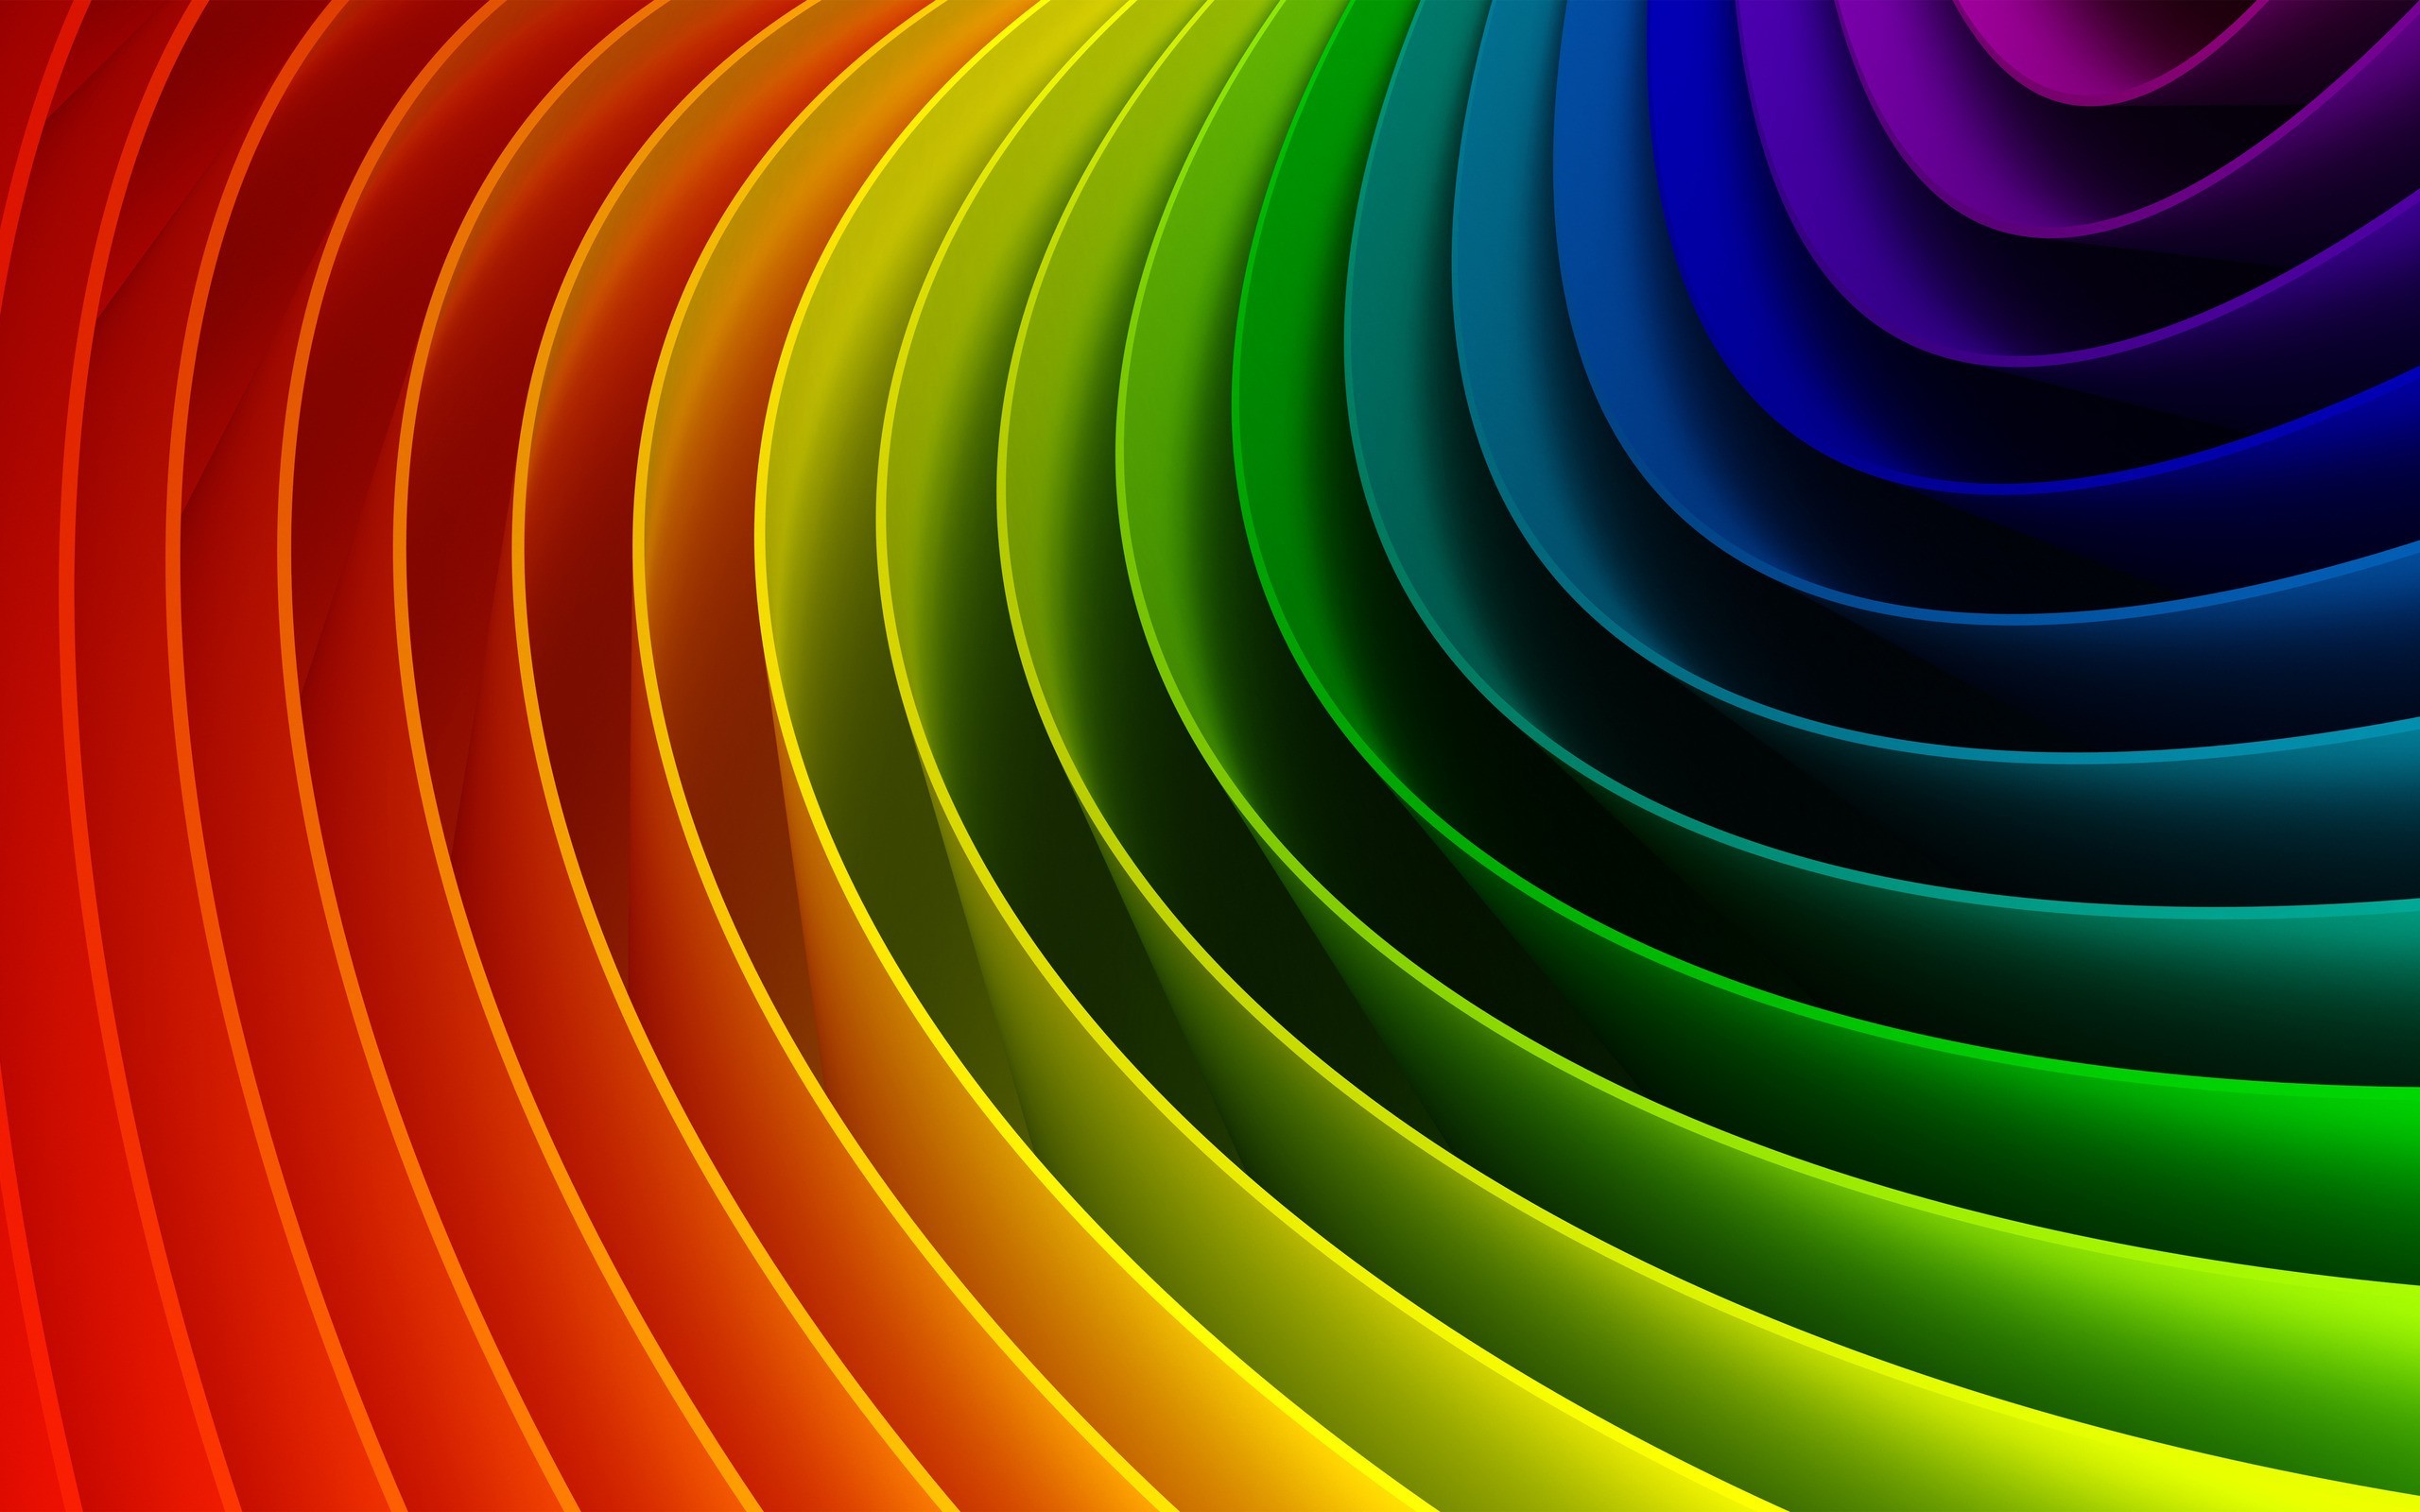 Curved colorful rainbow wallpapers Curved colorful rainbow stock